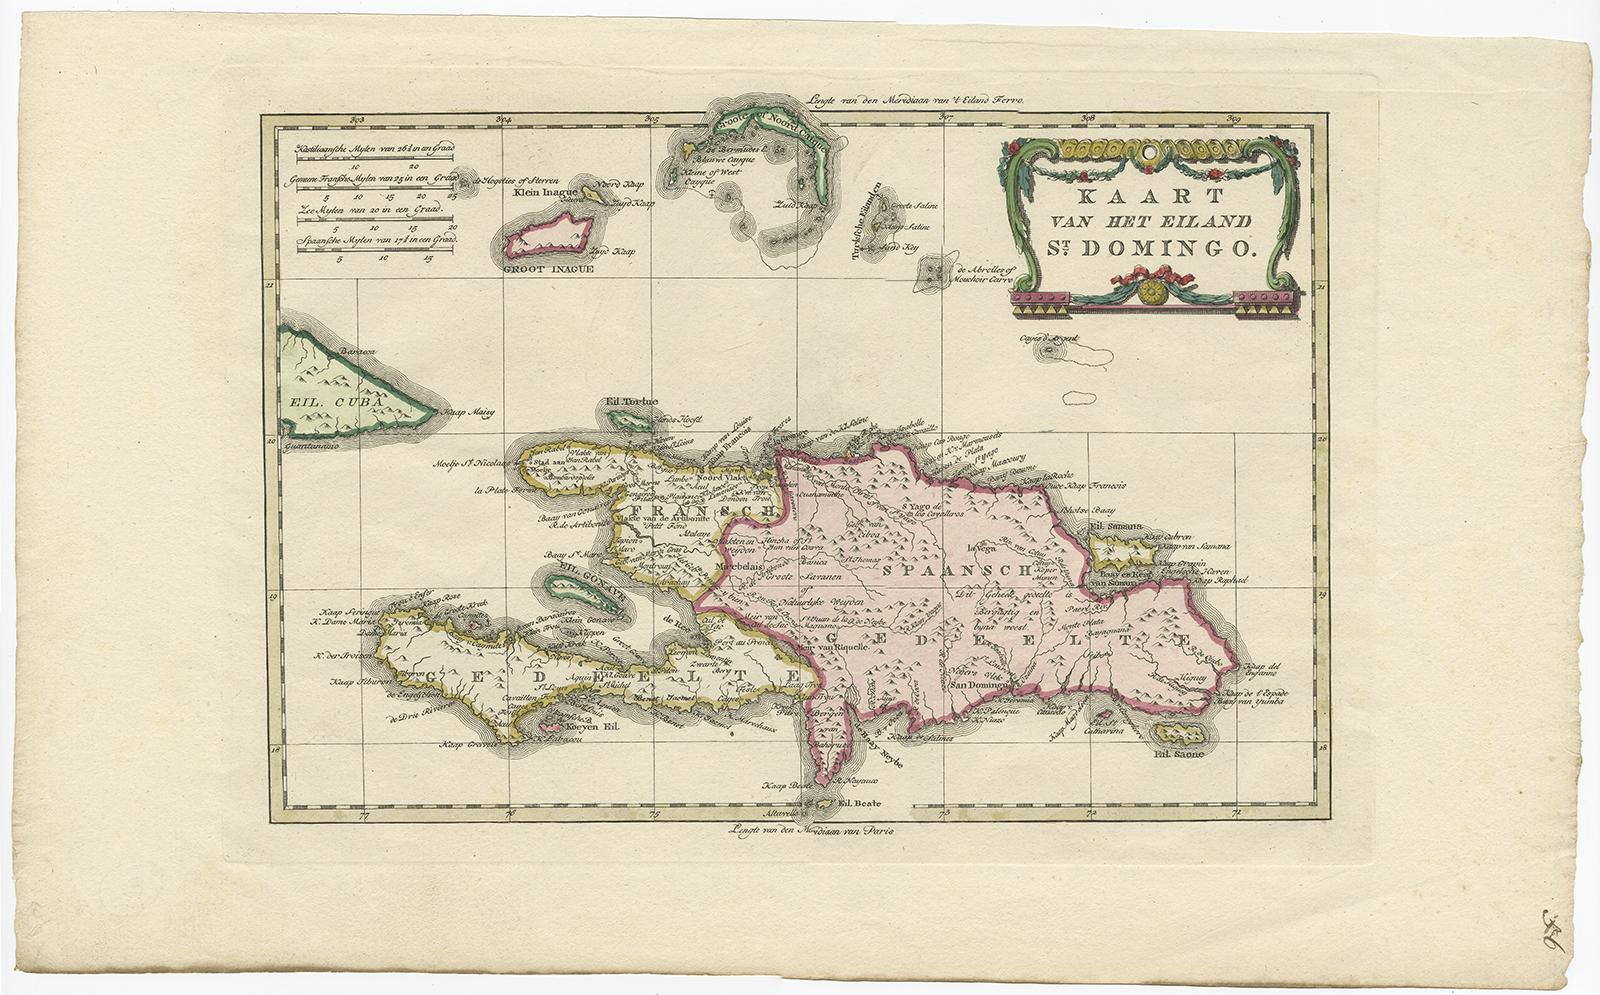 Antique map titled 'Kaart van het Eiland St. Domingo'. Rare map of the island of St. Domingo with Haïti and the Dominican Republic. In 1784, the work by Guillaume-Thomas Raynal was published in Amsterdam by publishing house Matthijs Schalekamp as